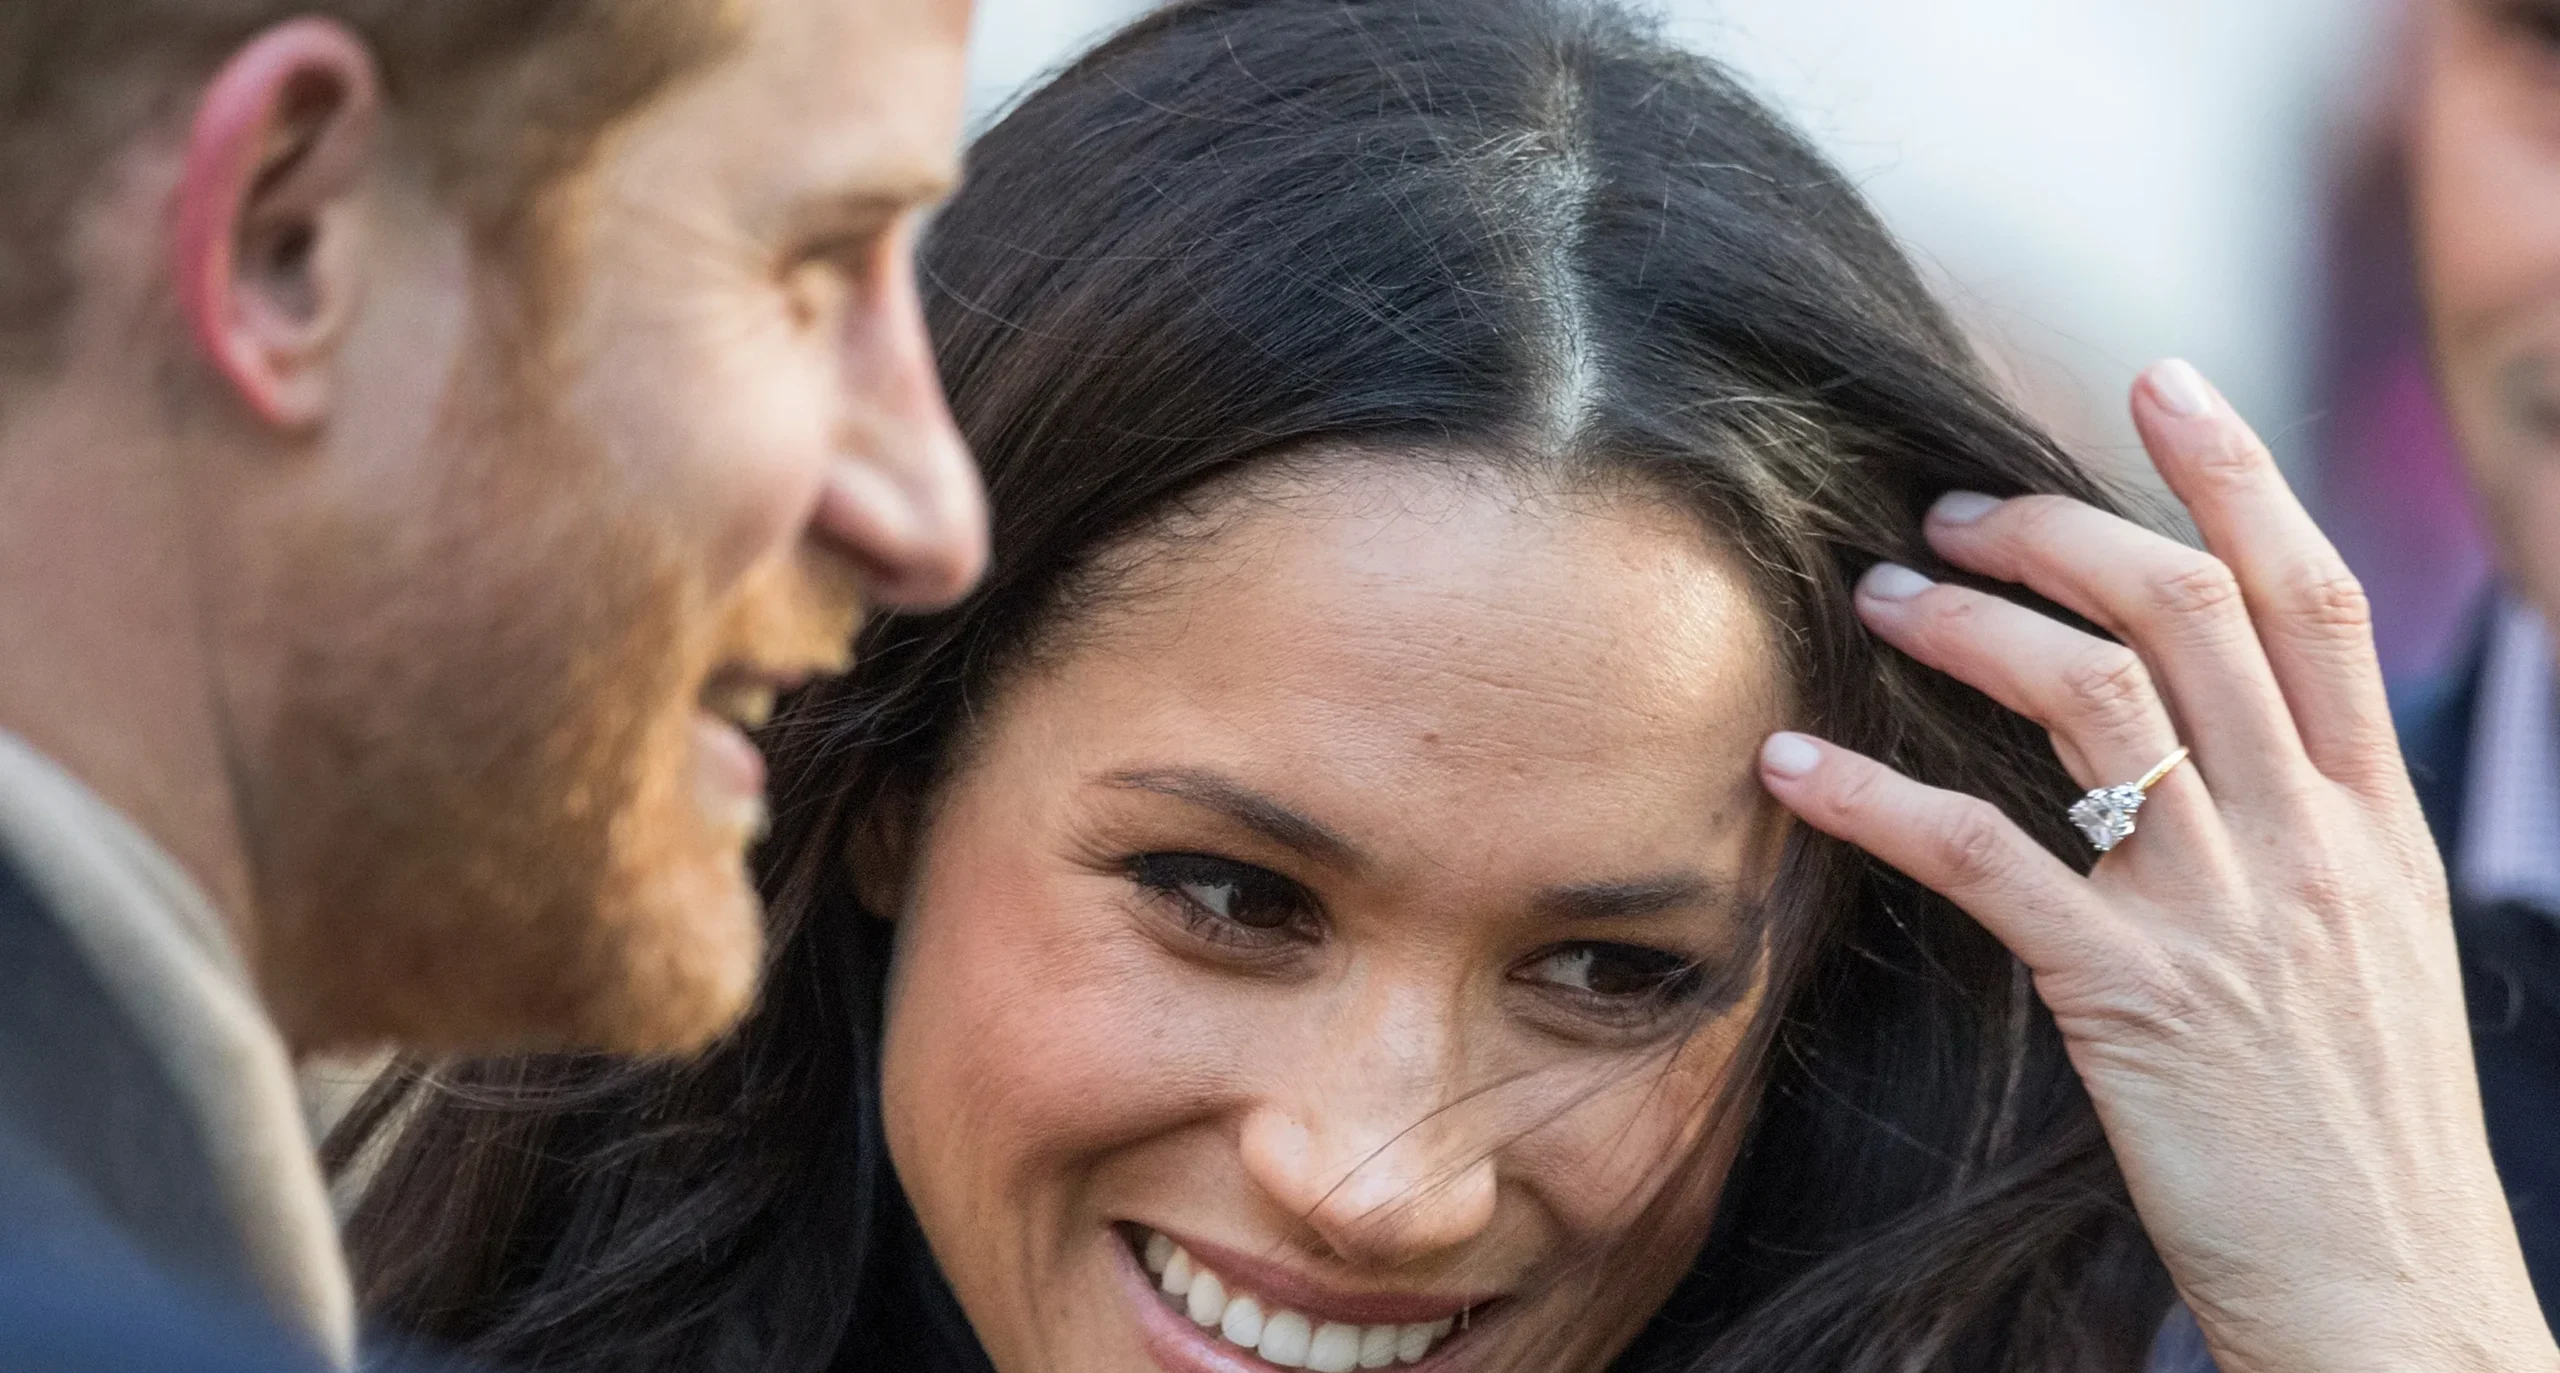 Meghan Markle asserted, "The fracture within the royal family doesn't stem from myself or my cherished husband, but rather from the hubris of its leadership and the void of fairness."